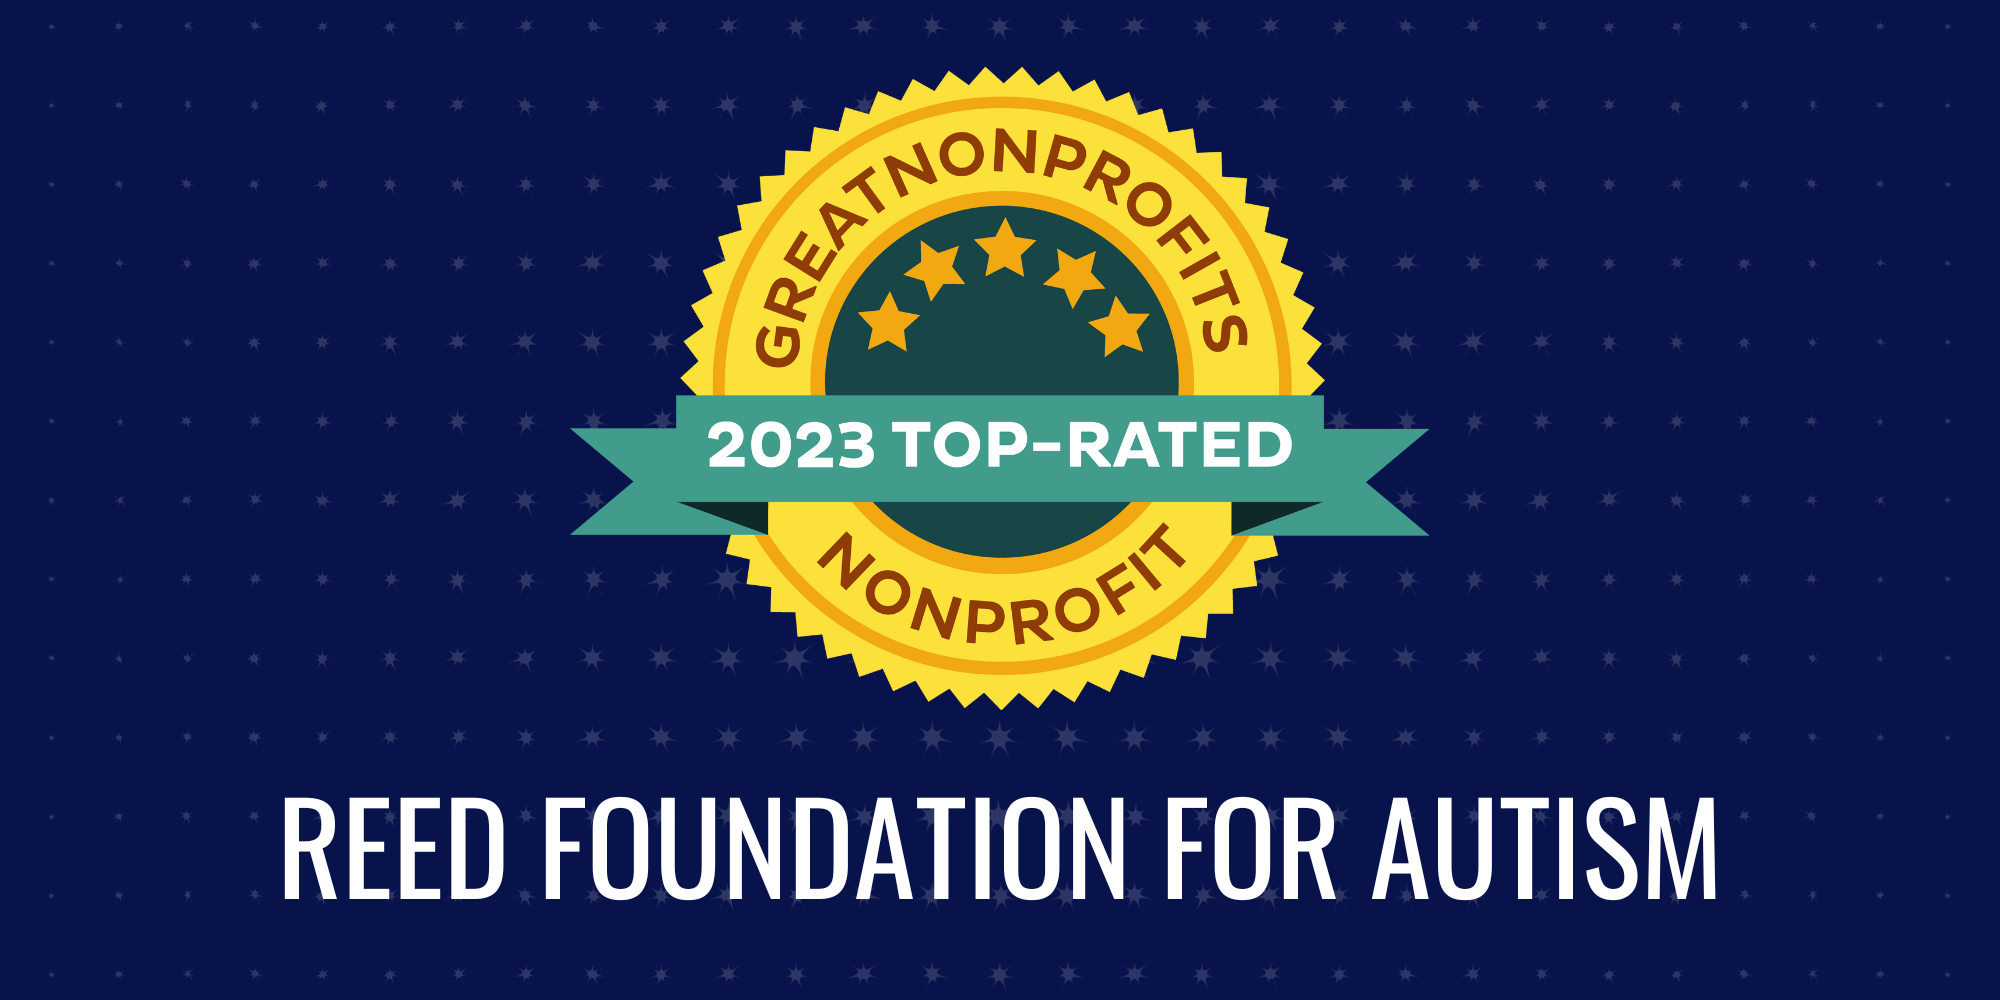 REED IS NAMED A “2023 TOP-RATED NONPROFIT” BY GREAT NONPROFITS